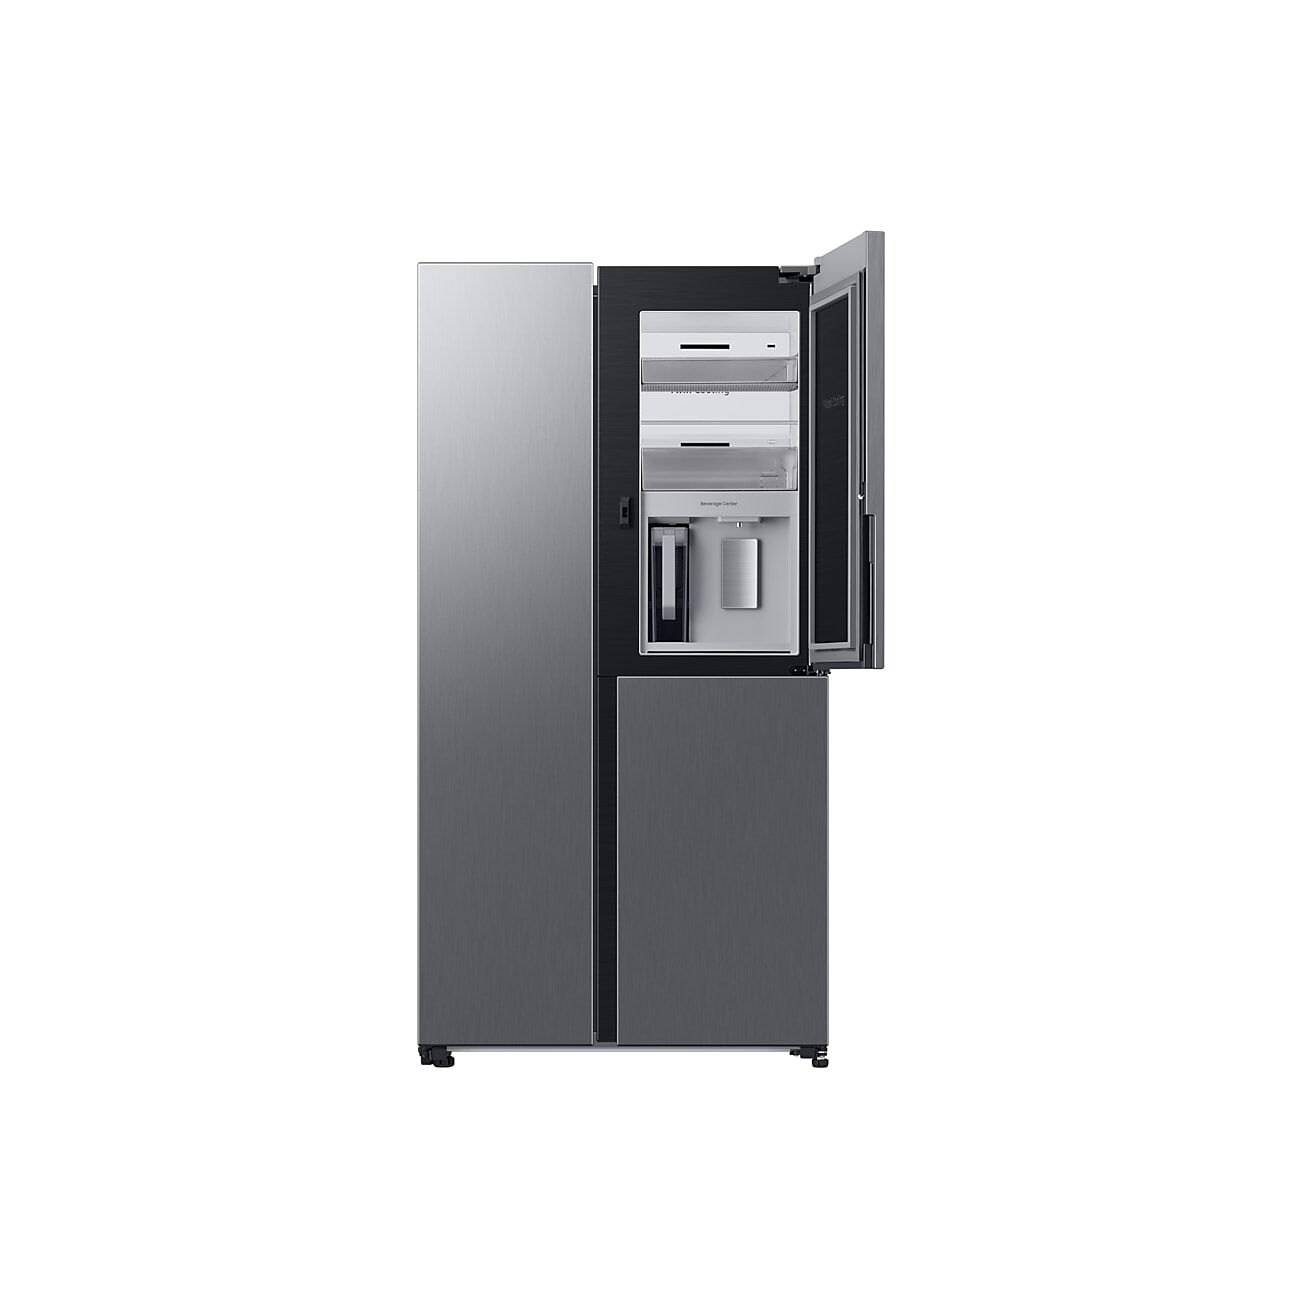 Samsung RS8000 9 Series American Fridge Freezer with Beverage Center™ in Silver